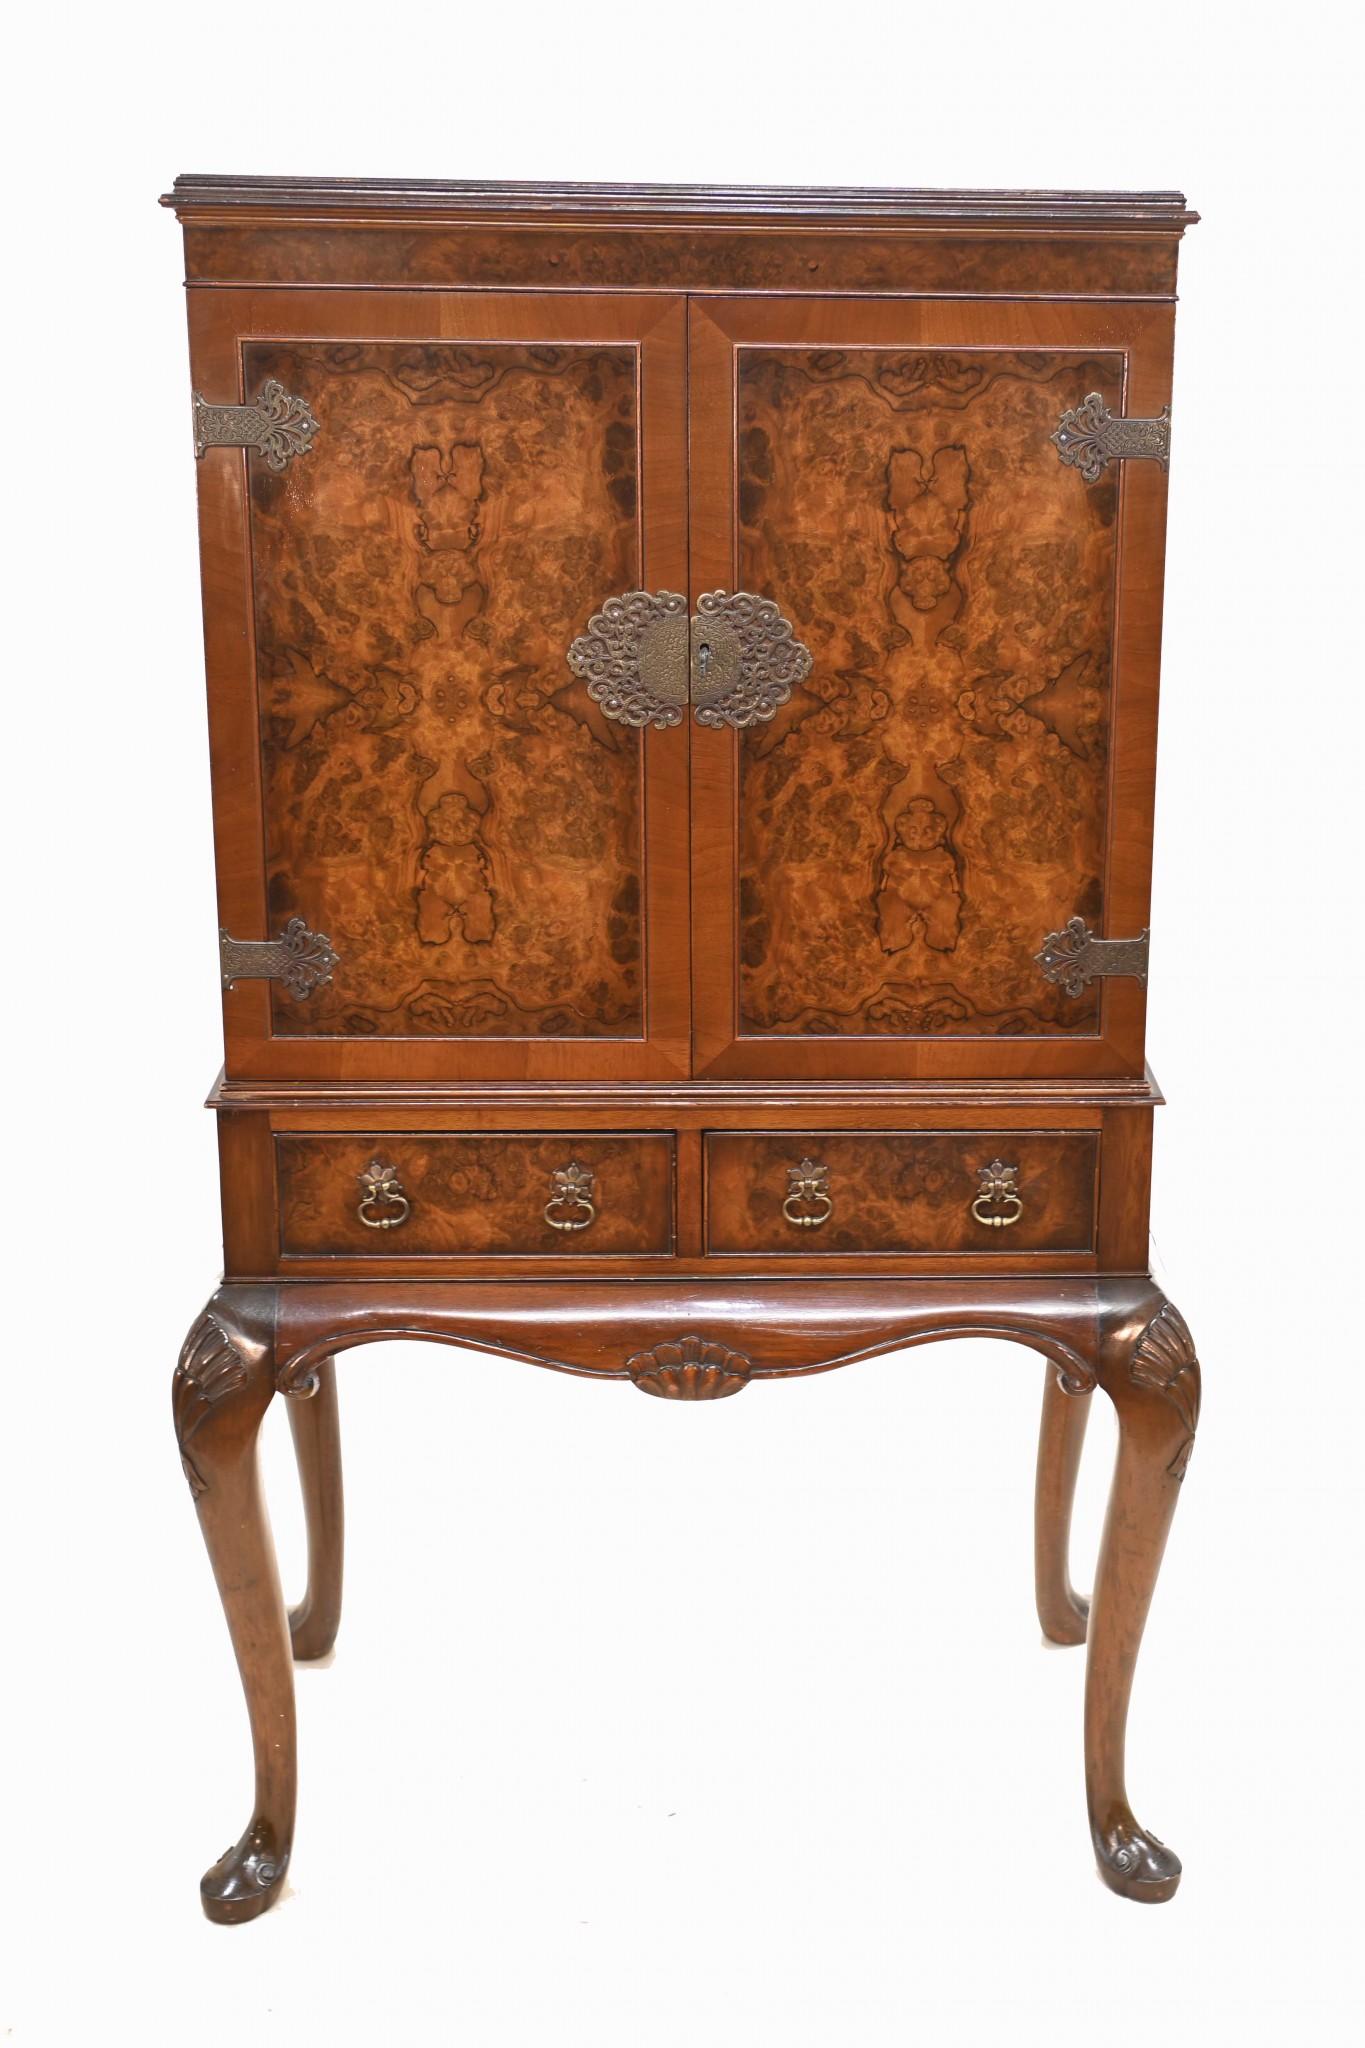 Walnut Art Deco Drinks Cabinet 1930 Epstein and Co Furniture For Sale